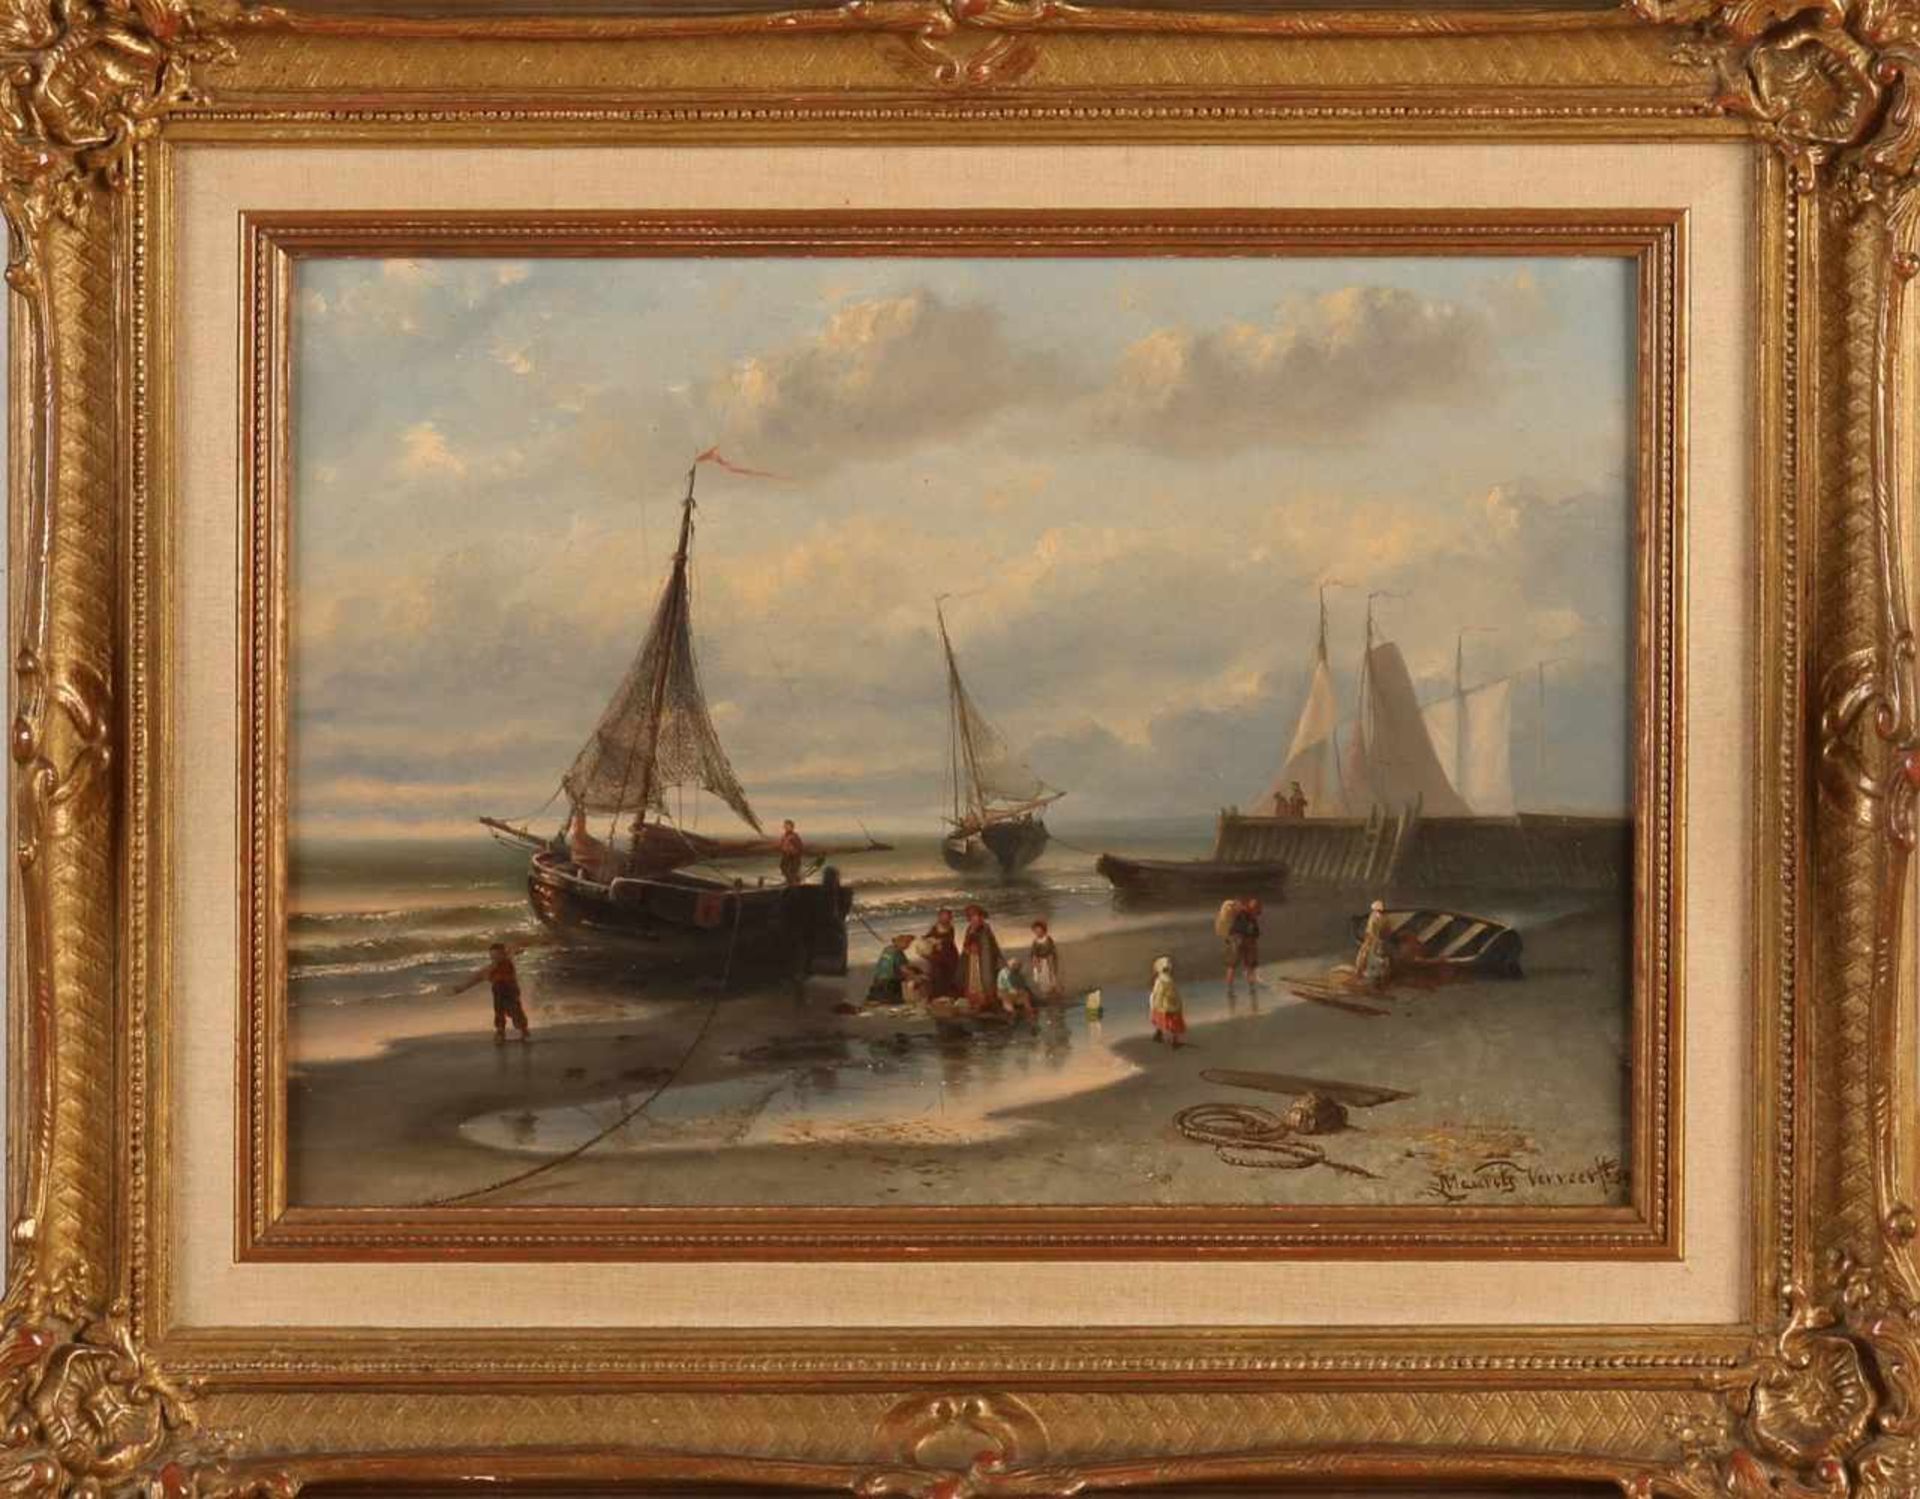 Mauritz Verveer Fecit '54. 1817 - 1903. Fisher People with boats on beach. Oil paint on panel. Size: